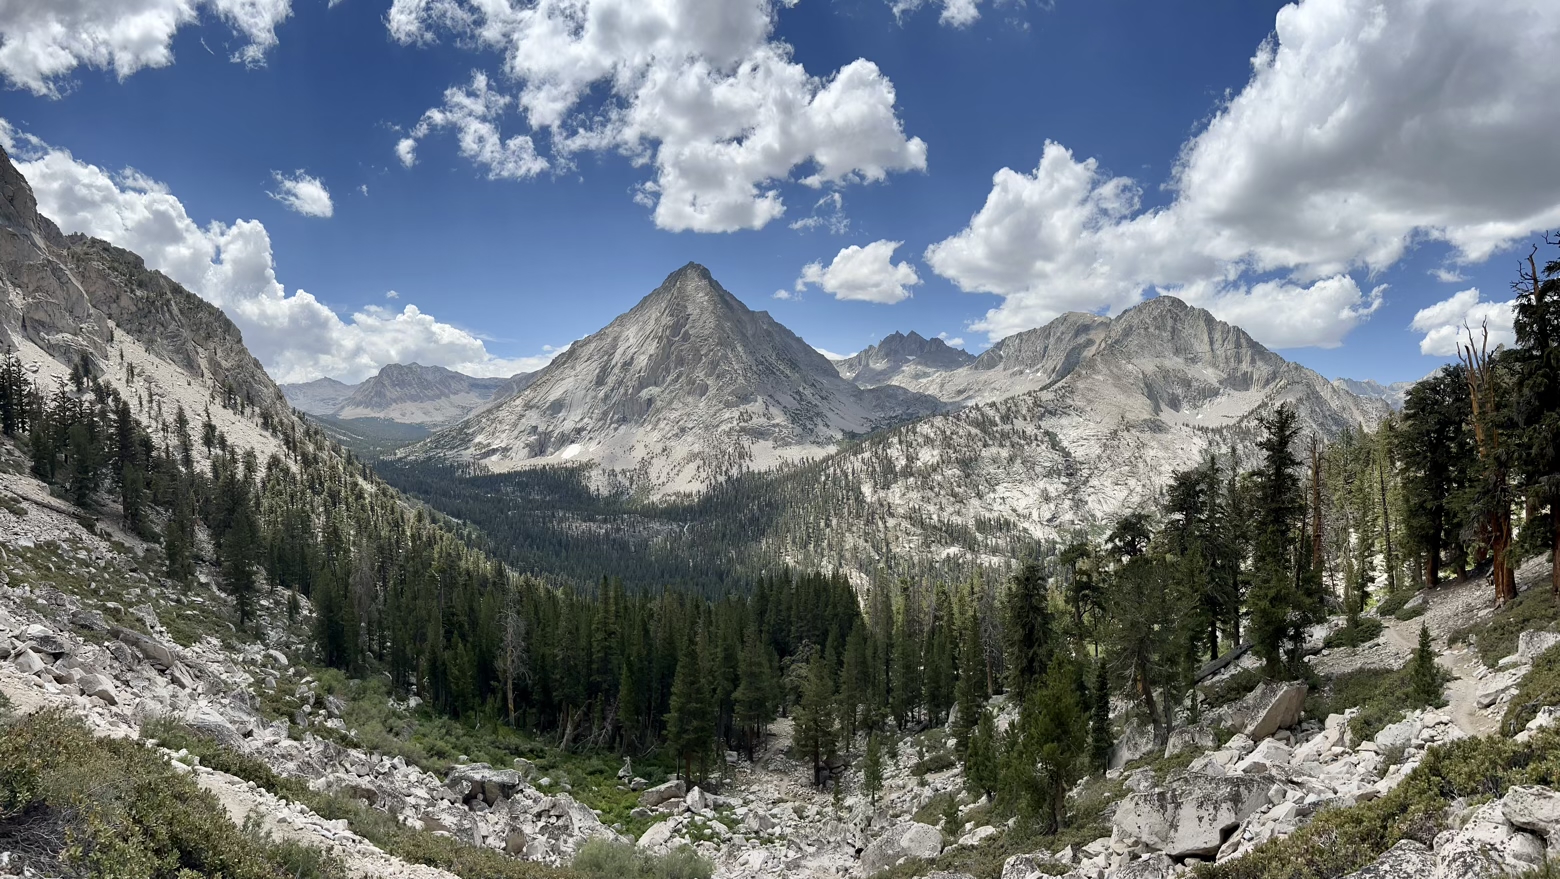 Vidette Meadow and our path to Forester Pass